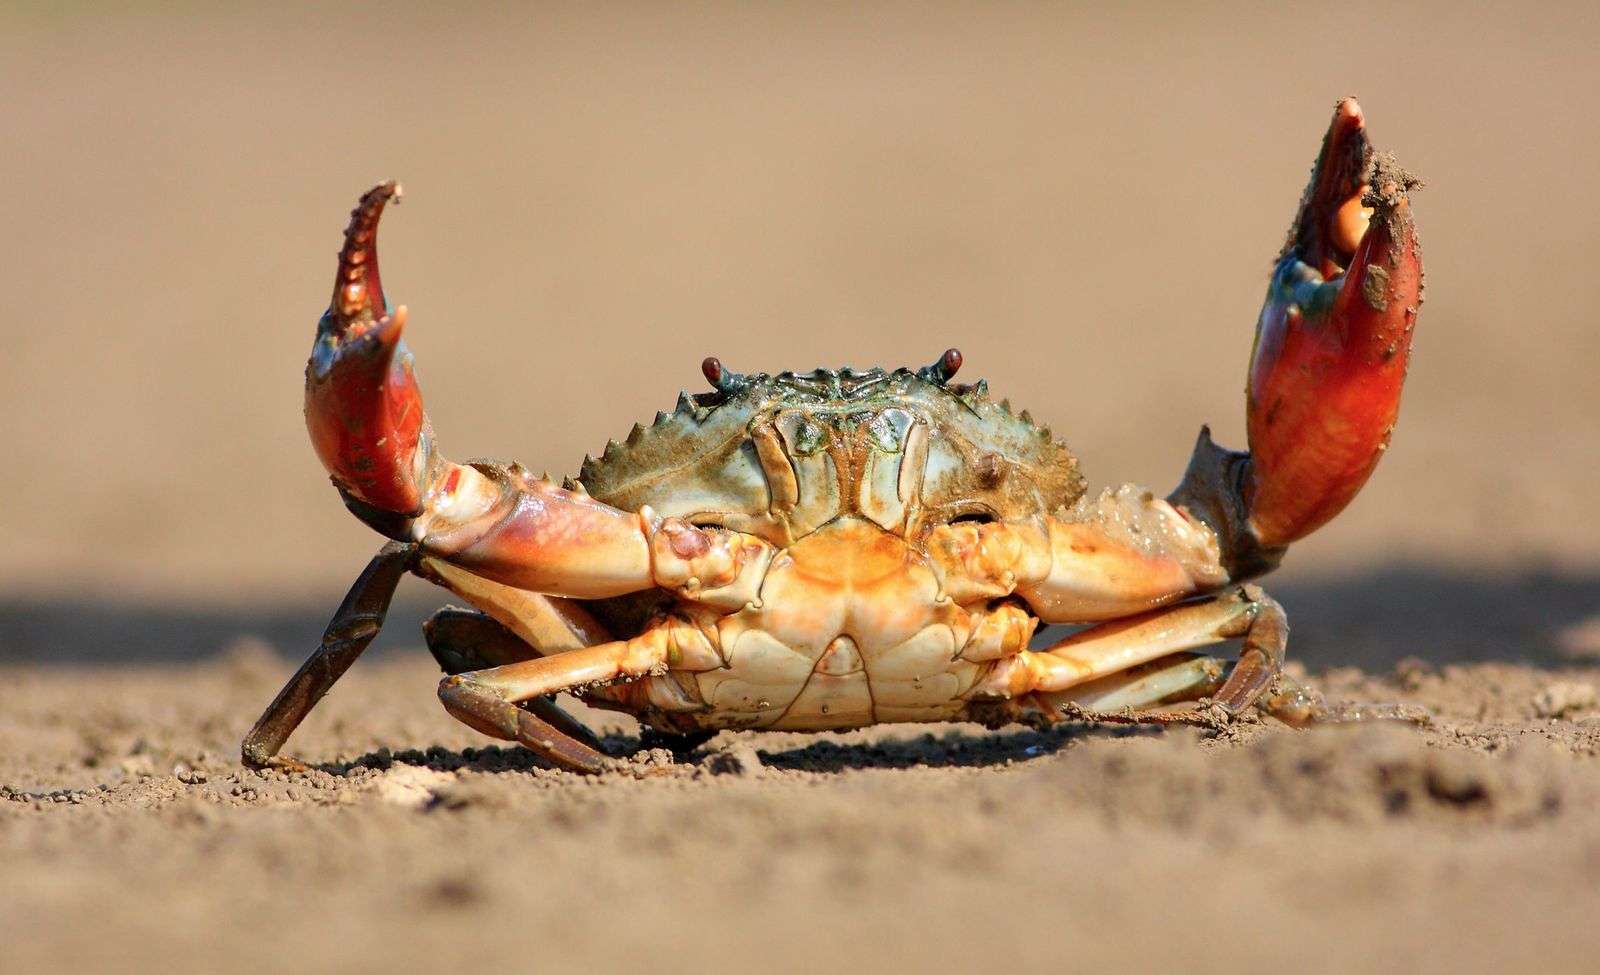 Does A Crab Have A Backbone